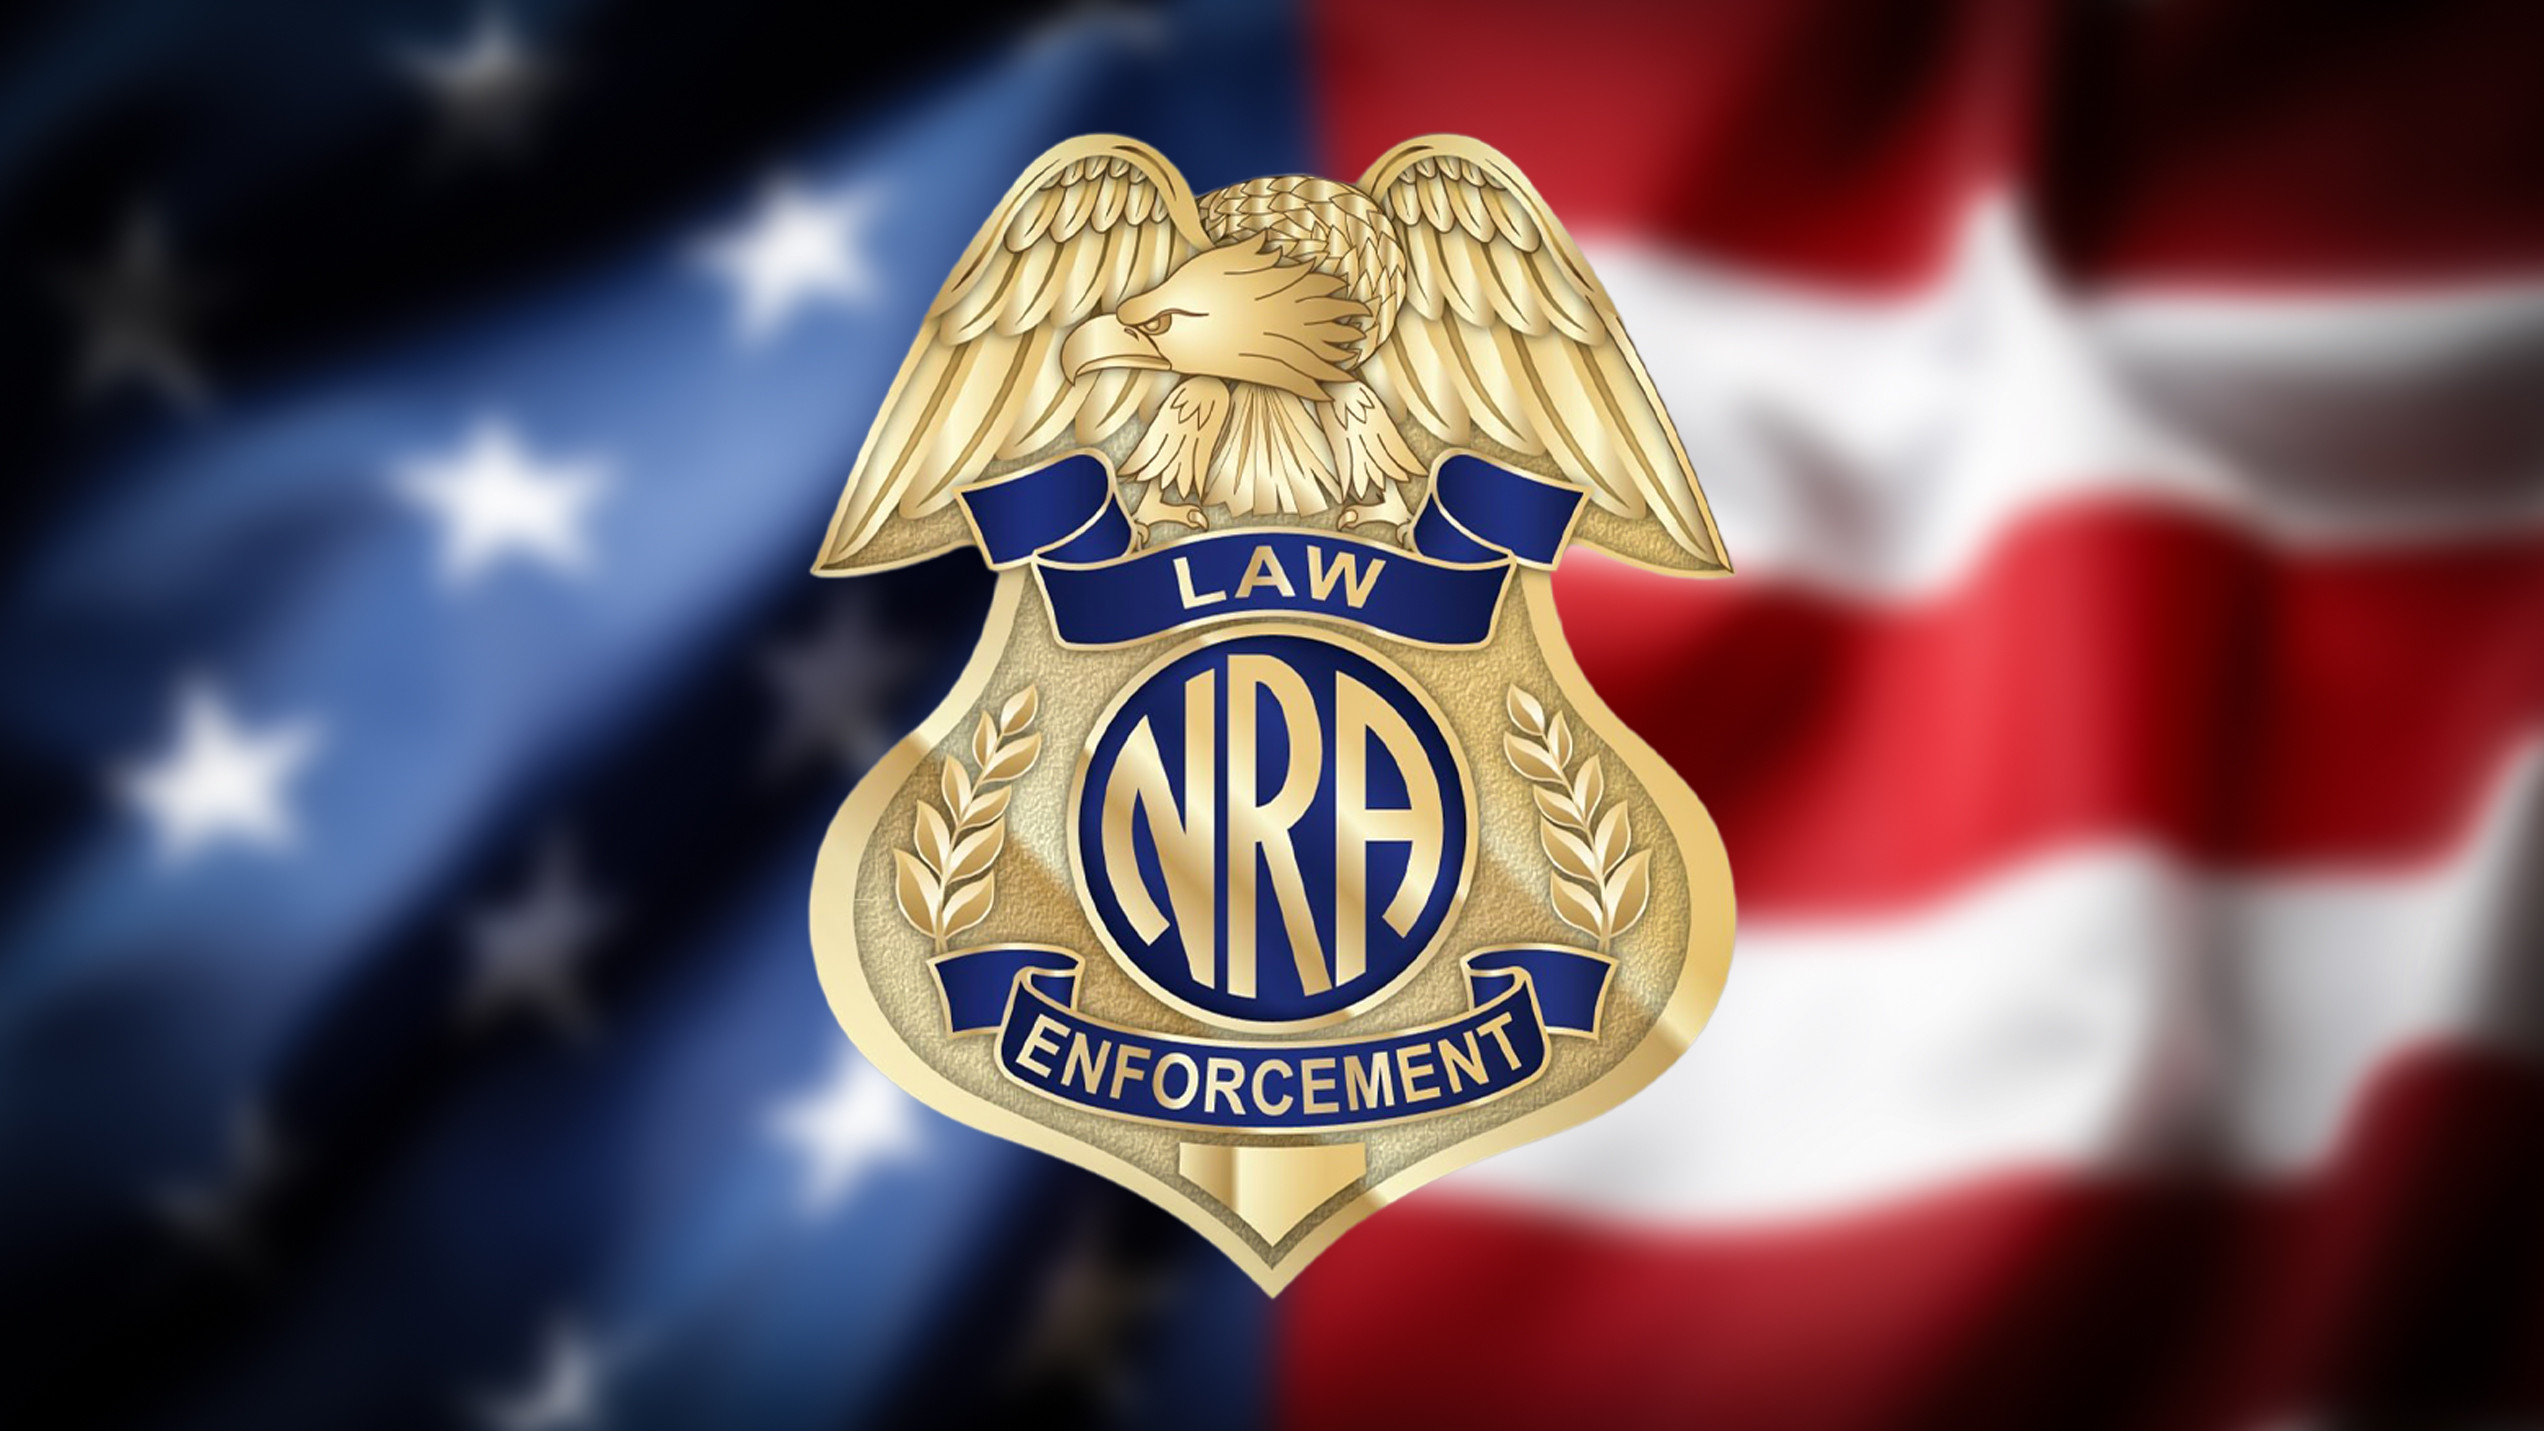 Nominate a Local Hero as the 2023 NRA Law Enforcement Officer of the Year